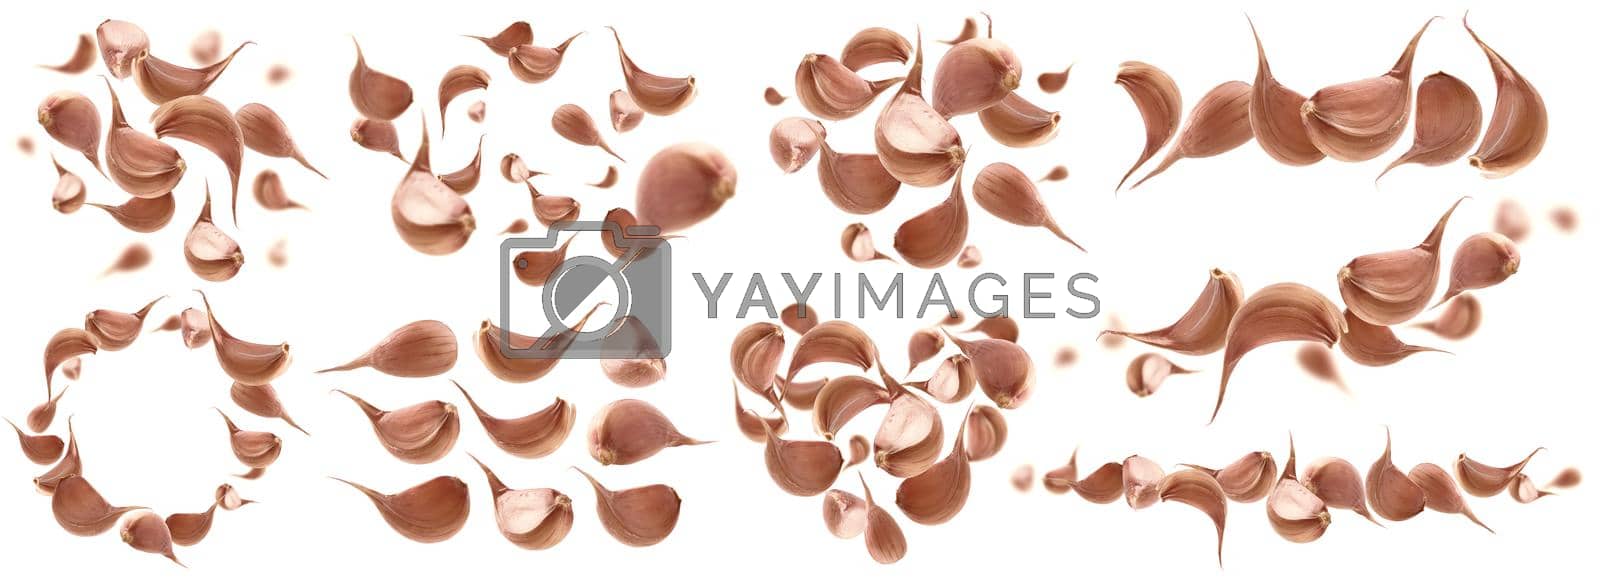 Royalty free image of A set of photos. Garlic cloves levitate on a white background by butenkow